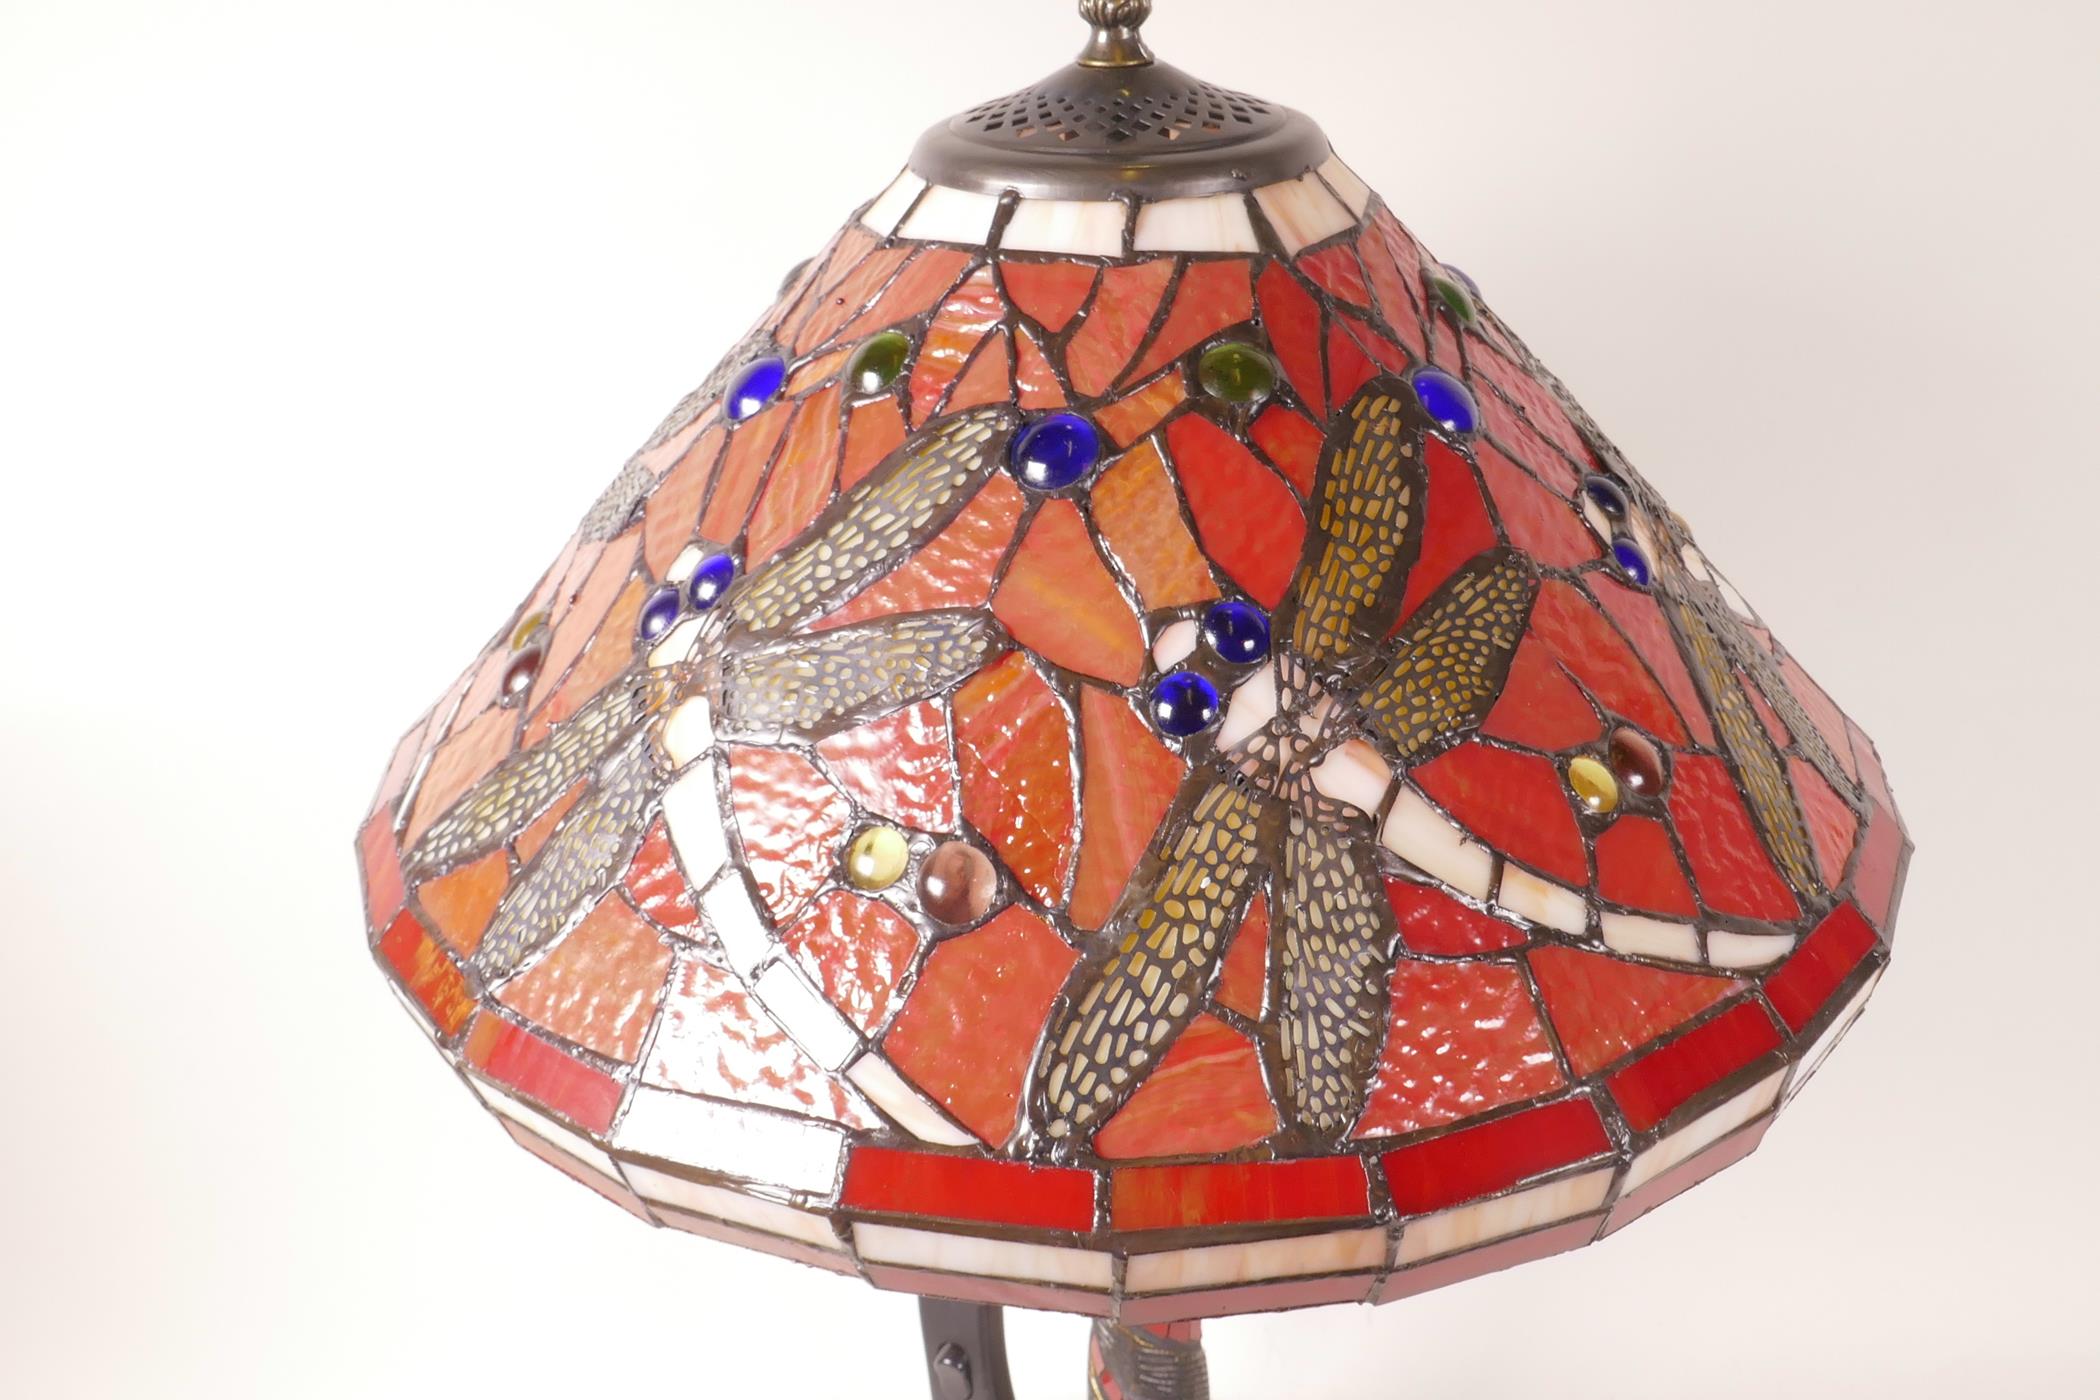 A Tiffany style table lamp with dragonfly decoration on a red ground, 21" high - Image 3 of 3